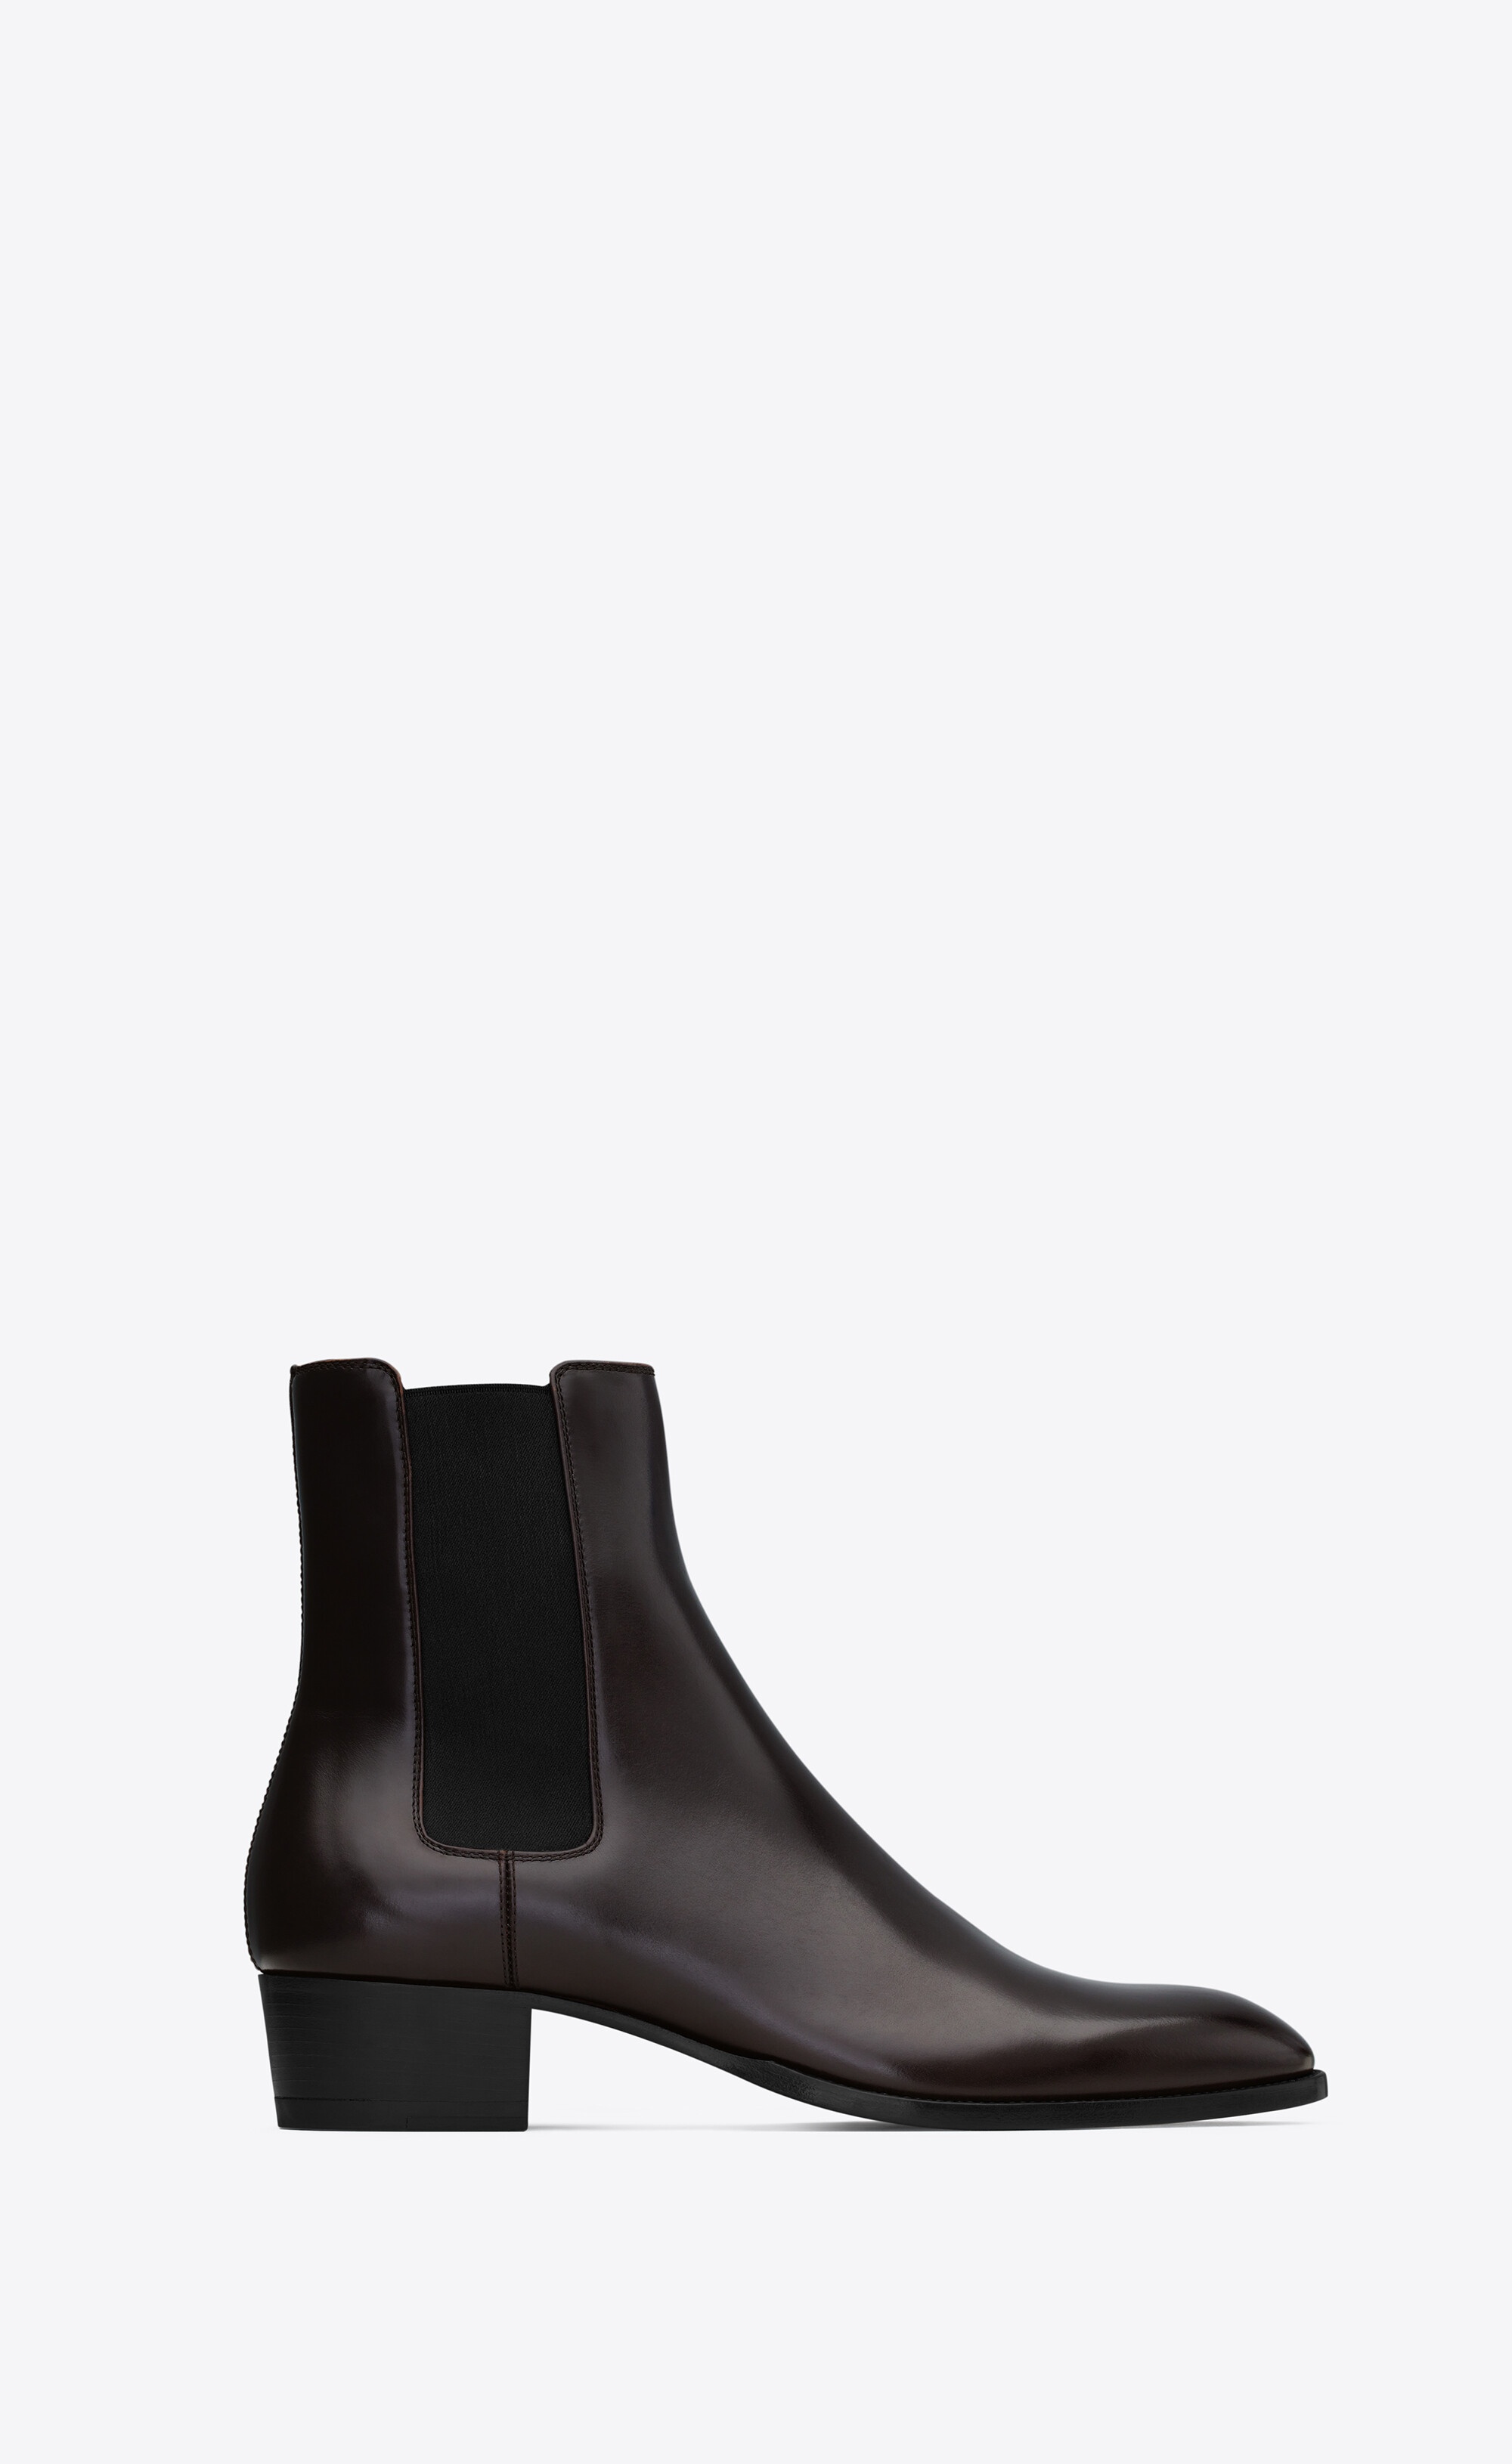 wyatt chelsea boots in smooth leather - 1